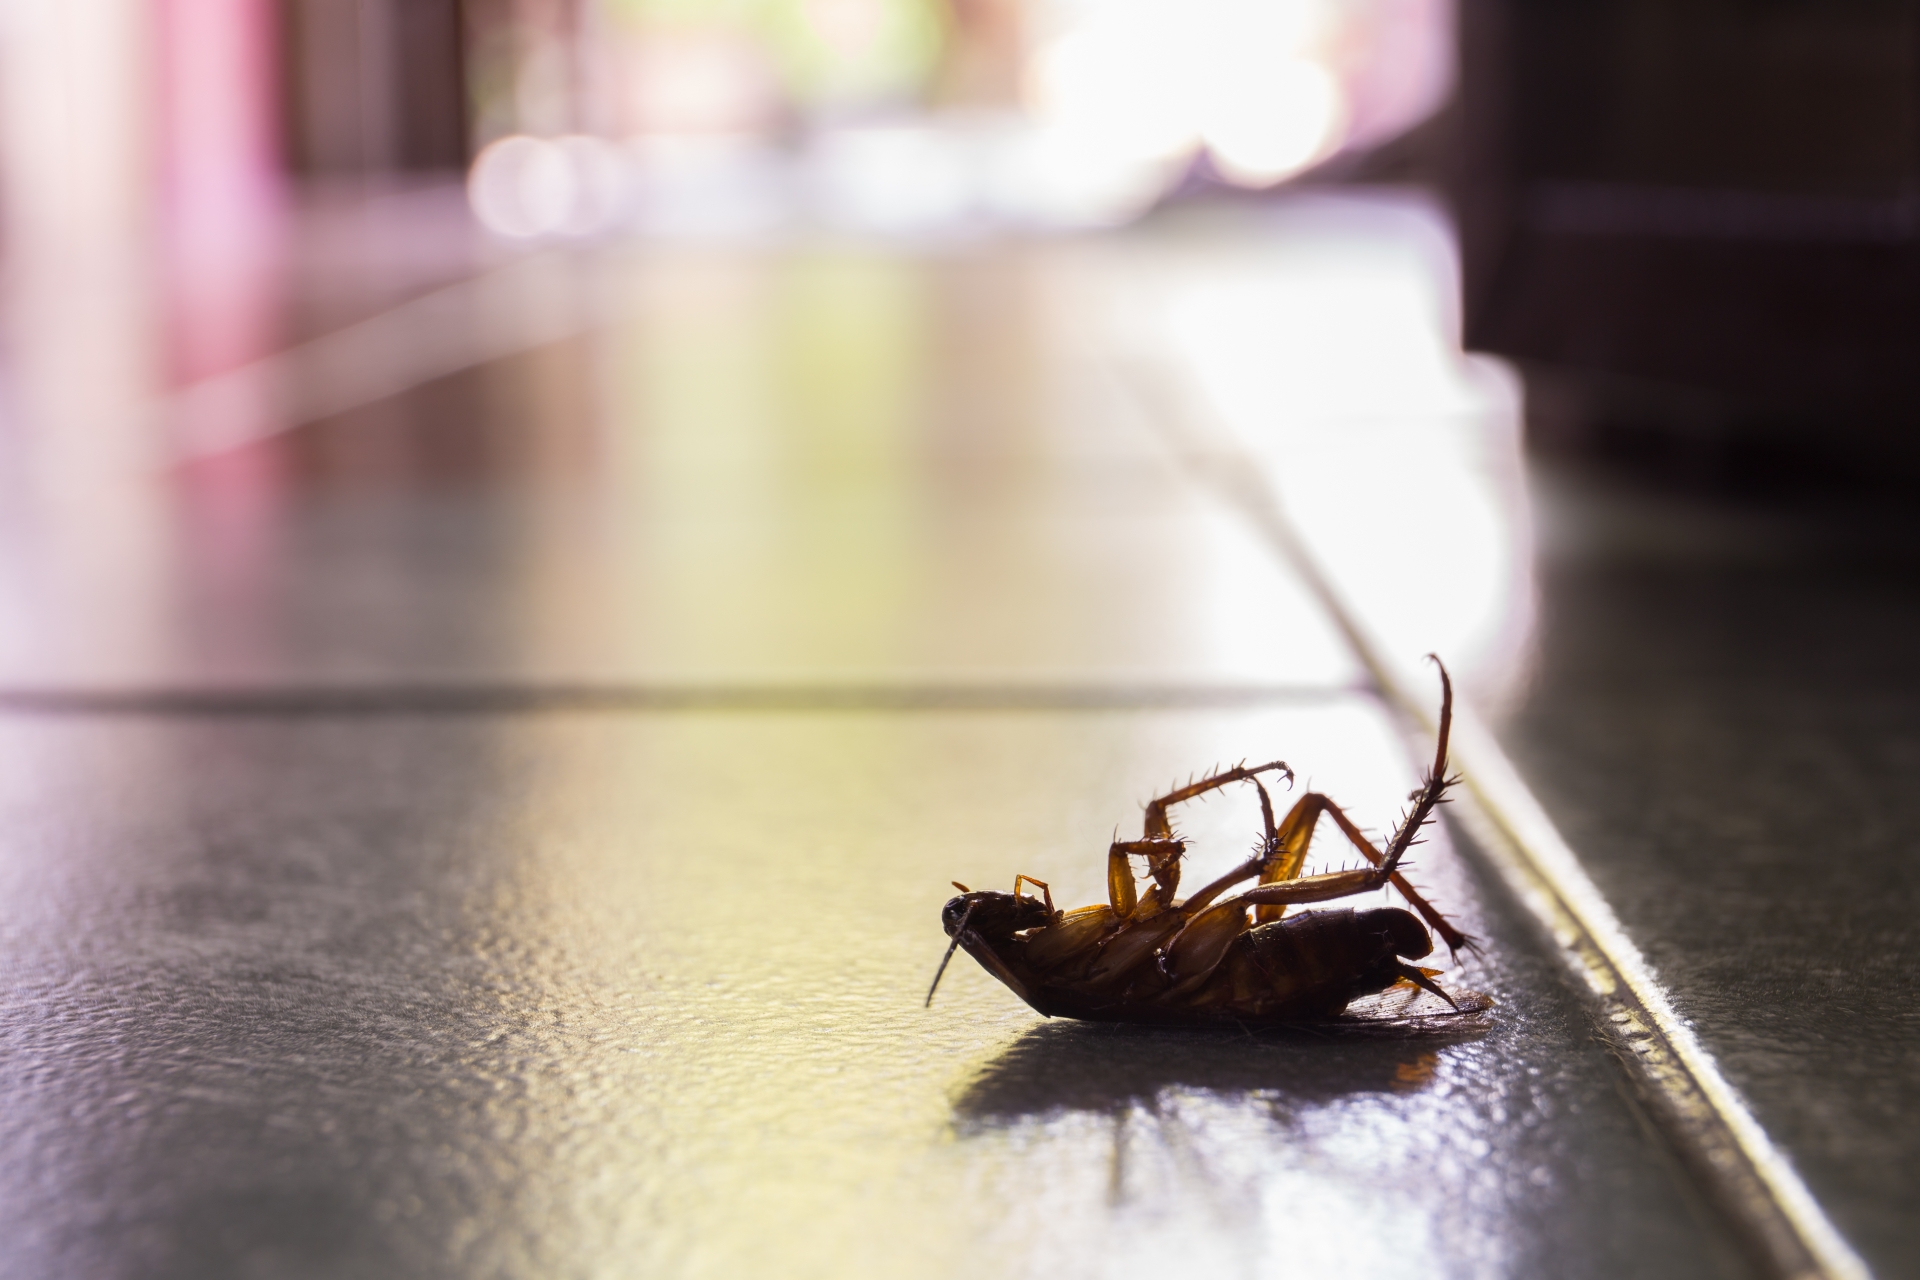 Cockroach Control, Pest Control in Kilburn, Queens Park, West Hampstead, NW6. Call Now 020 8166 9746